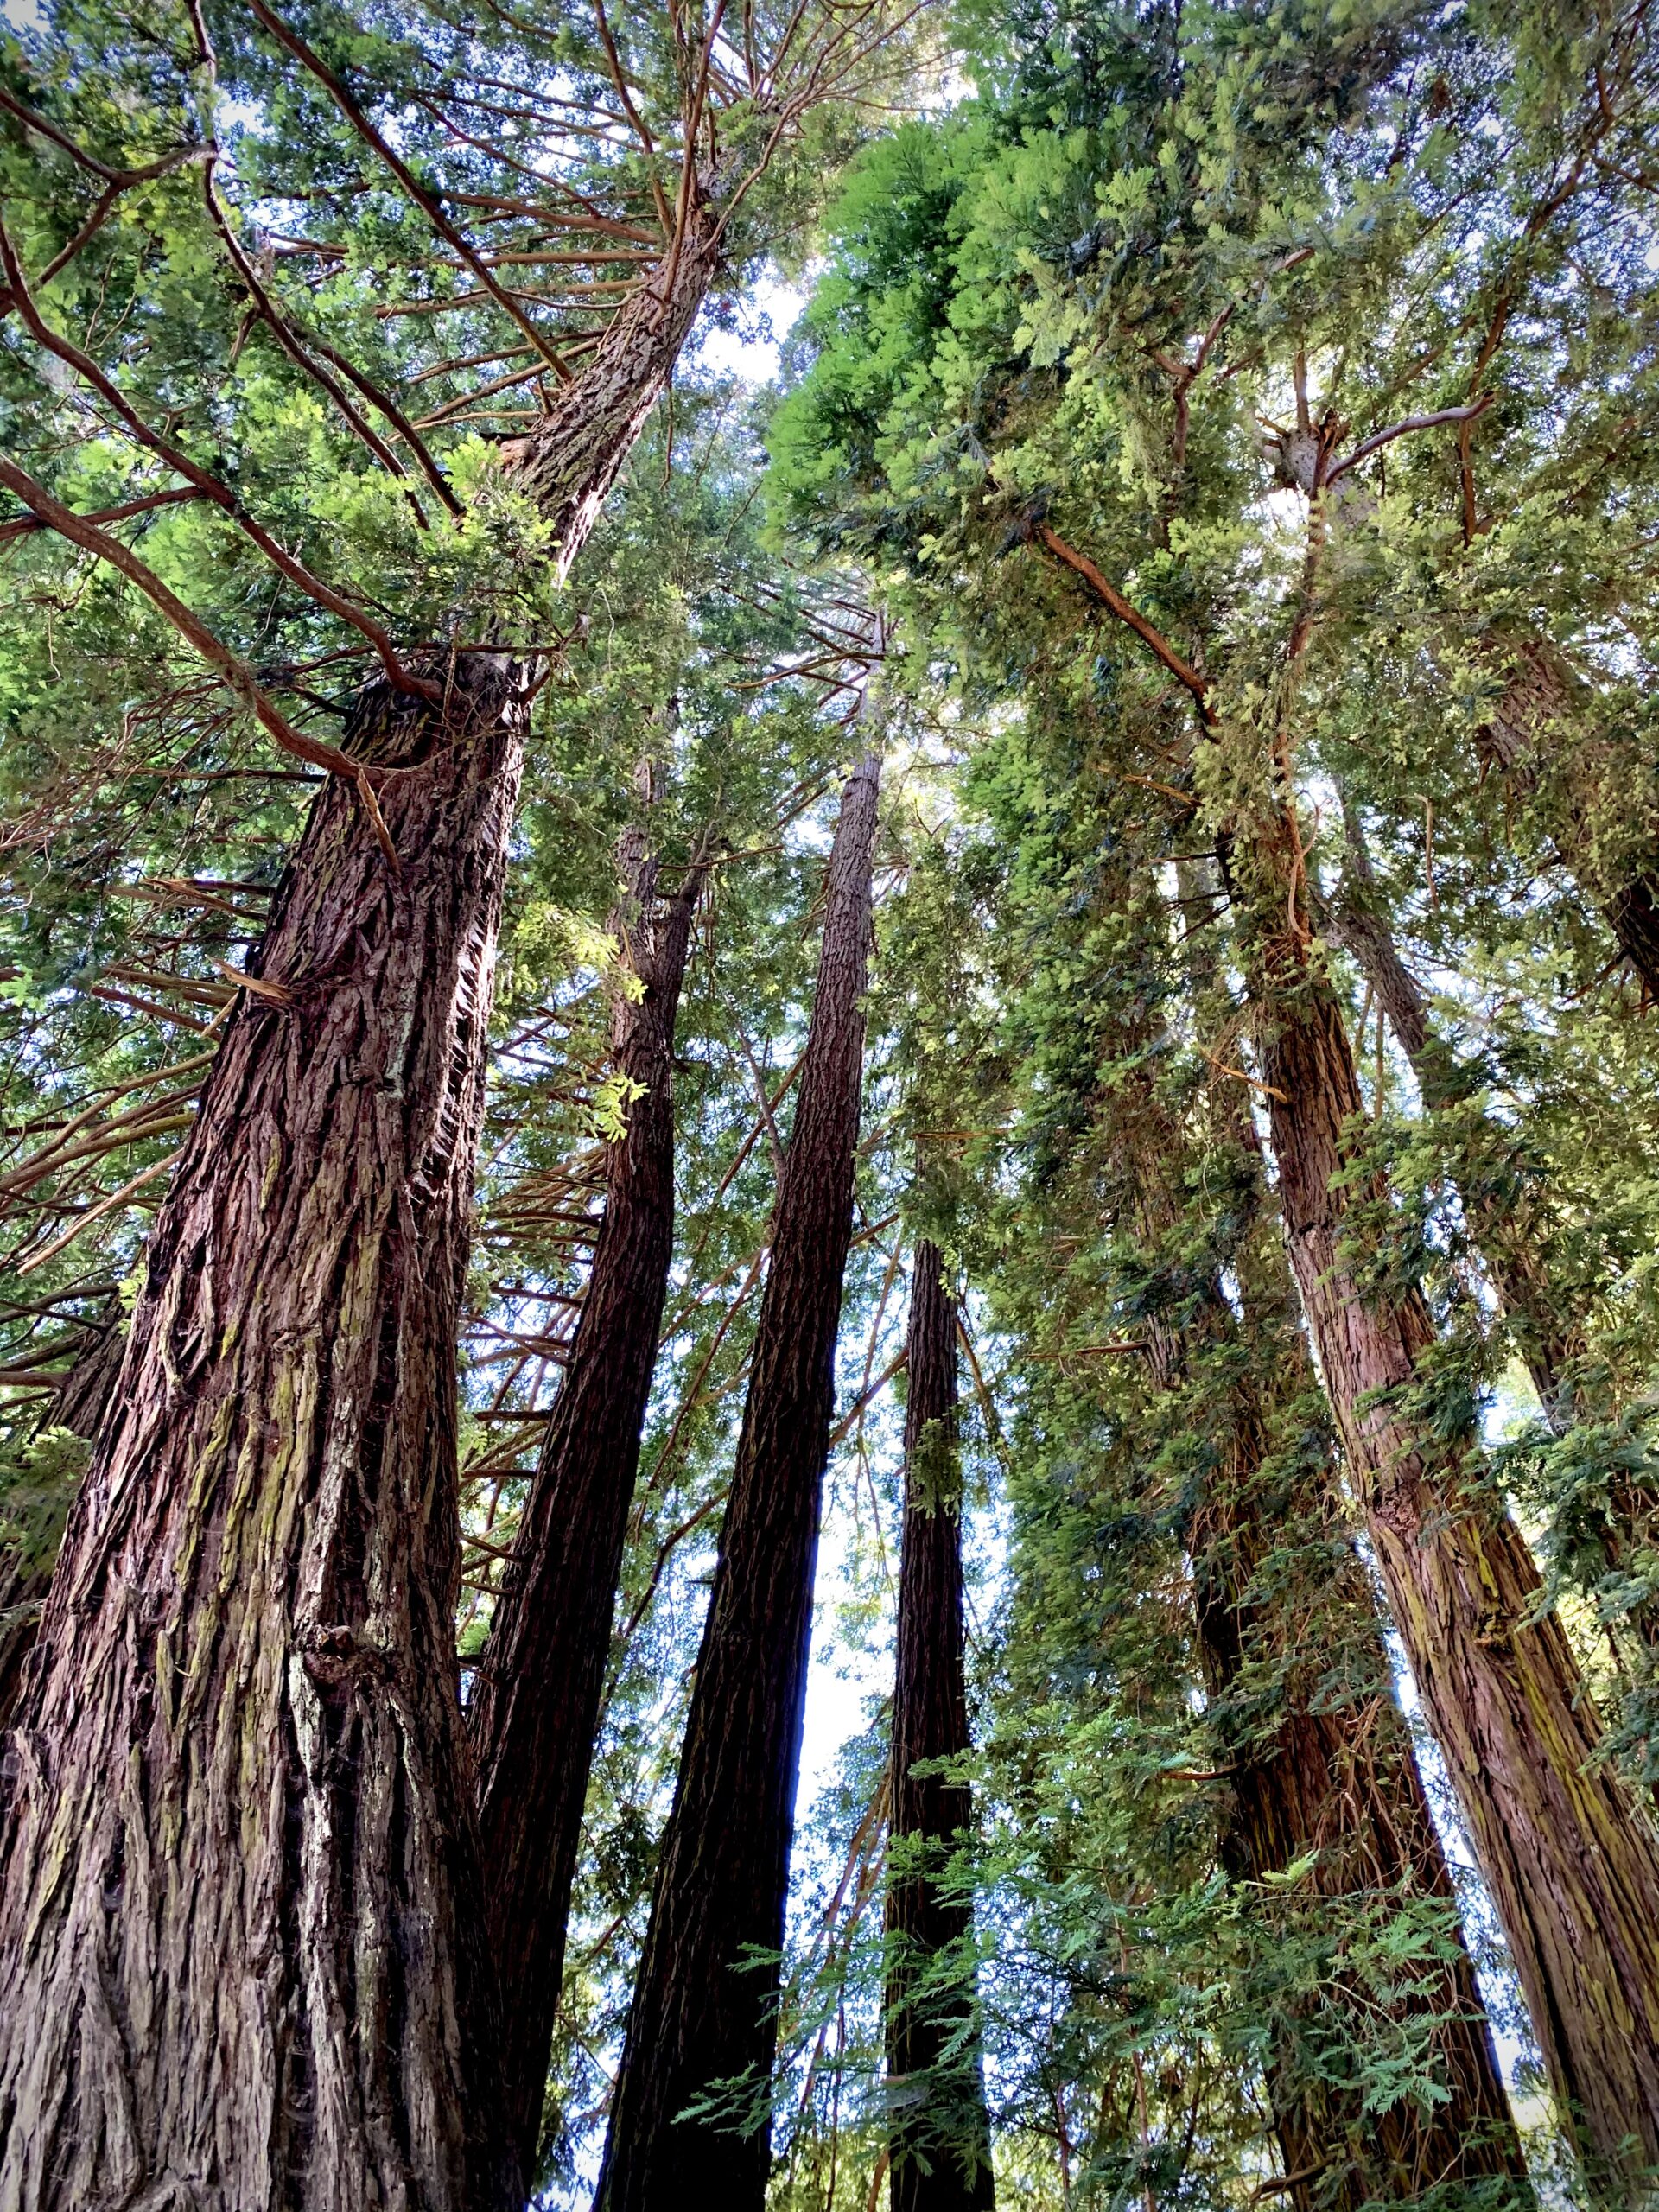 Photograph - redwood forest california 